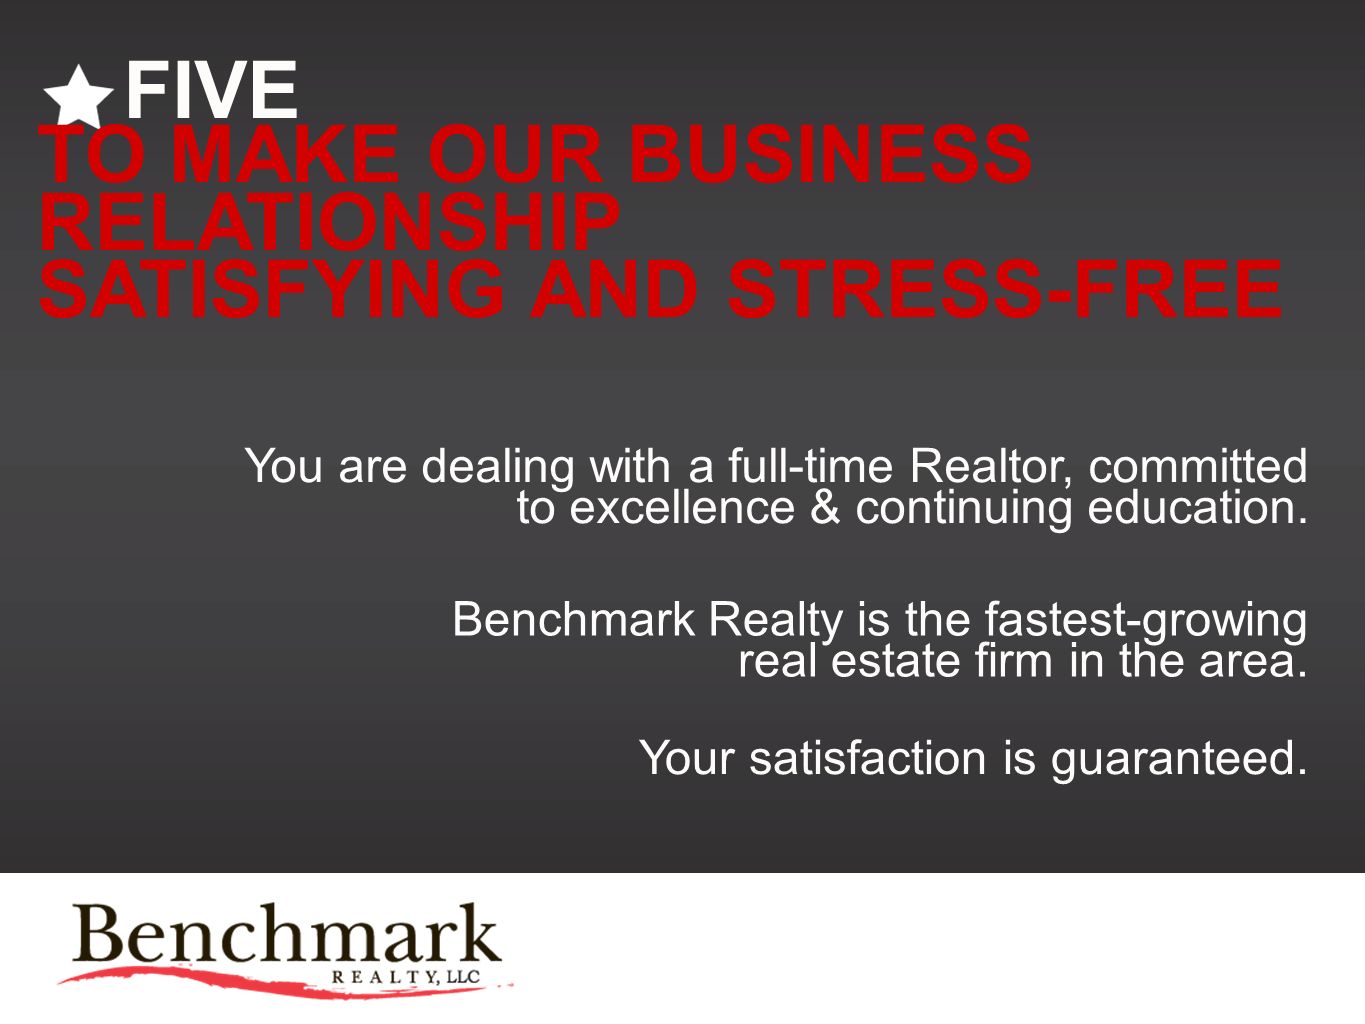 FIVE TO MAKE OUR BUSINESS RELATIONSHIP SATISFYING AND STRESS-FREE You are dealing with a full-time Realtor, committed to excellence & continuing education.